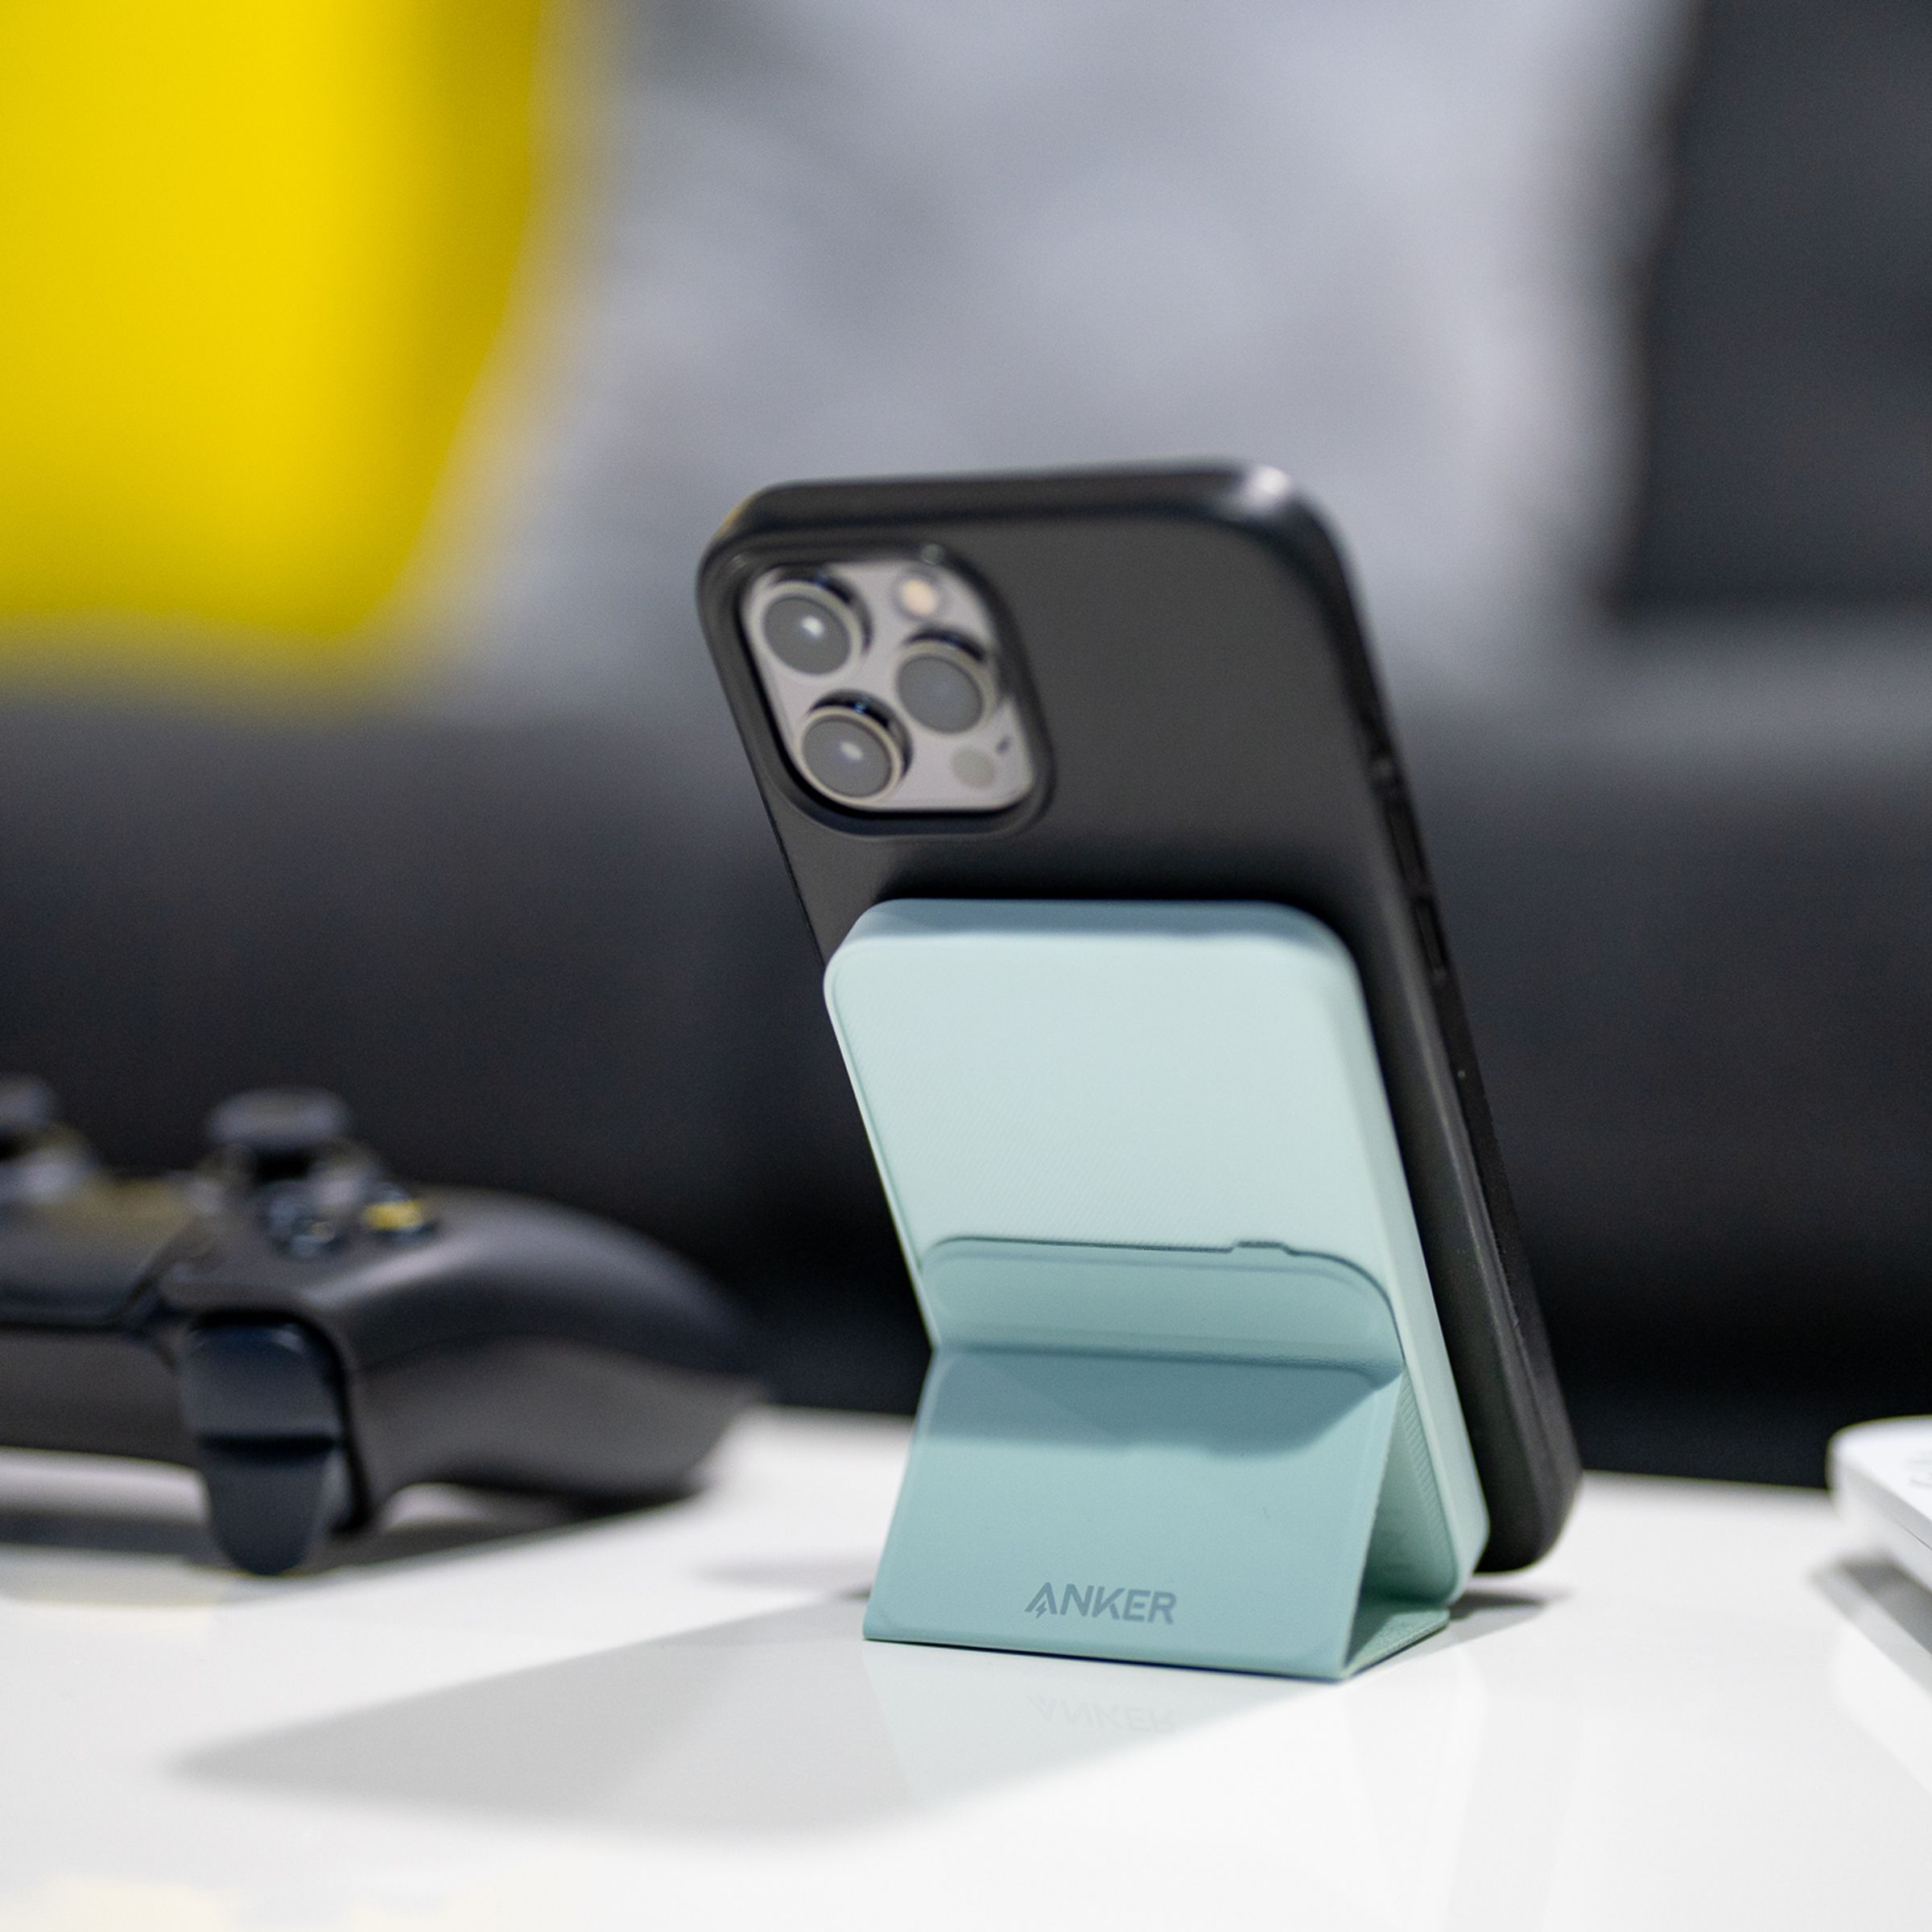 Anker’s 621 Magnetic Battery (MagGo) holding up an iPhone with its kickstand on a desk.